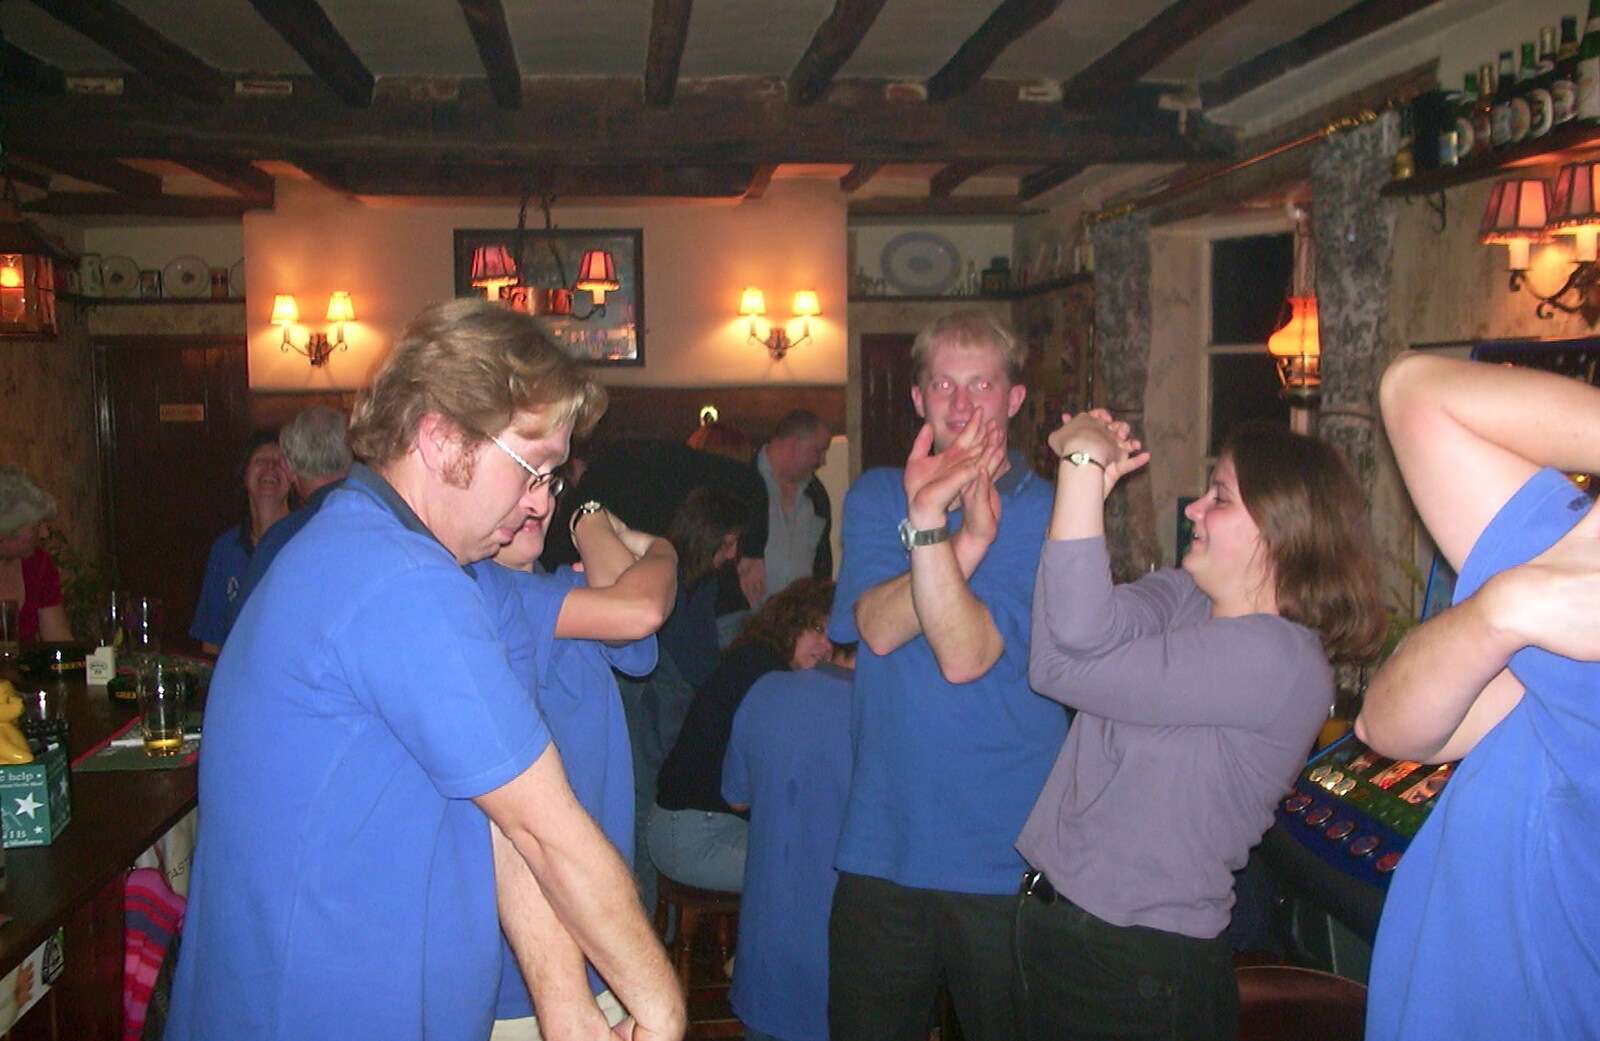 A BSCC Presentation, Brome Swan, Suffolk - 9th November 2002: Some strange moves occur